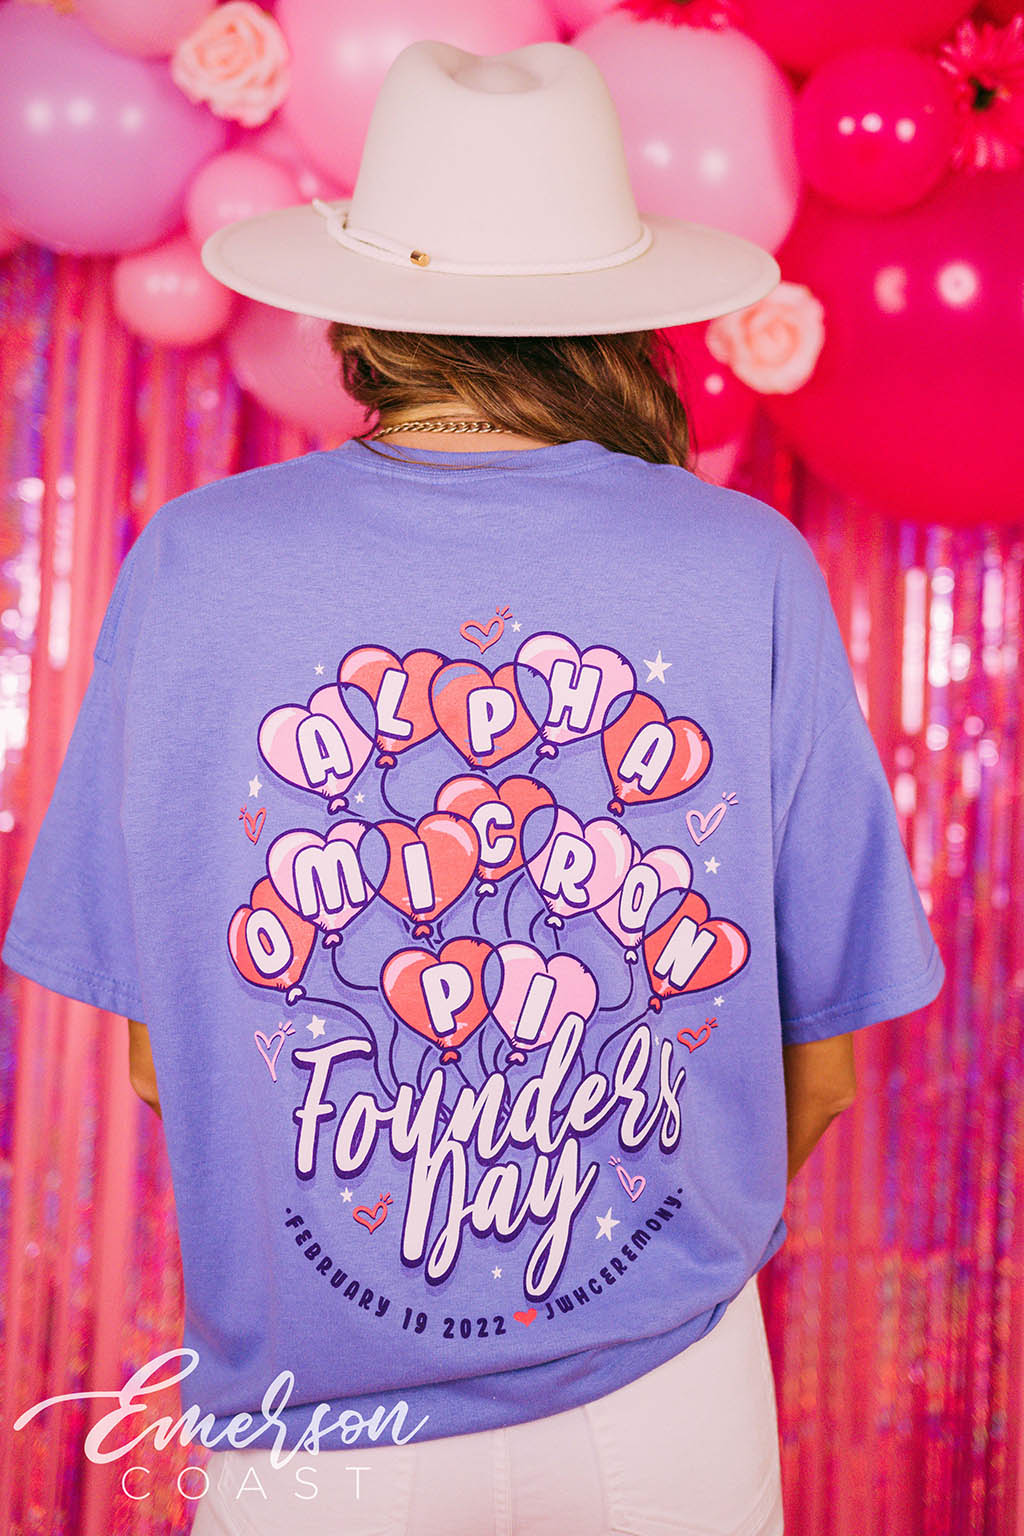 Alpha Omicron Pi Founders Day Tee